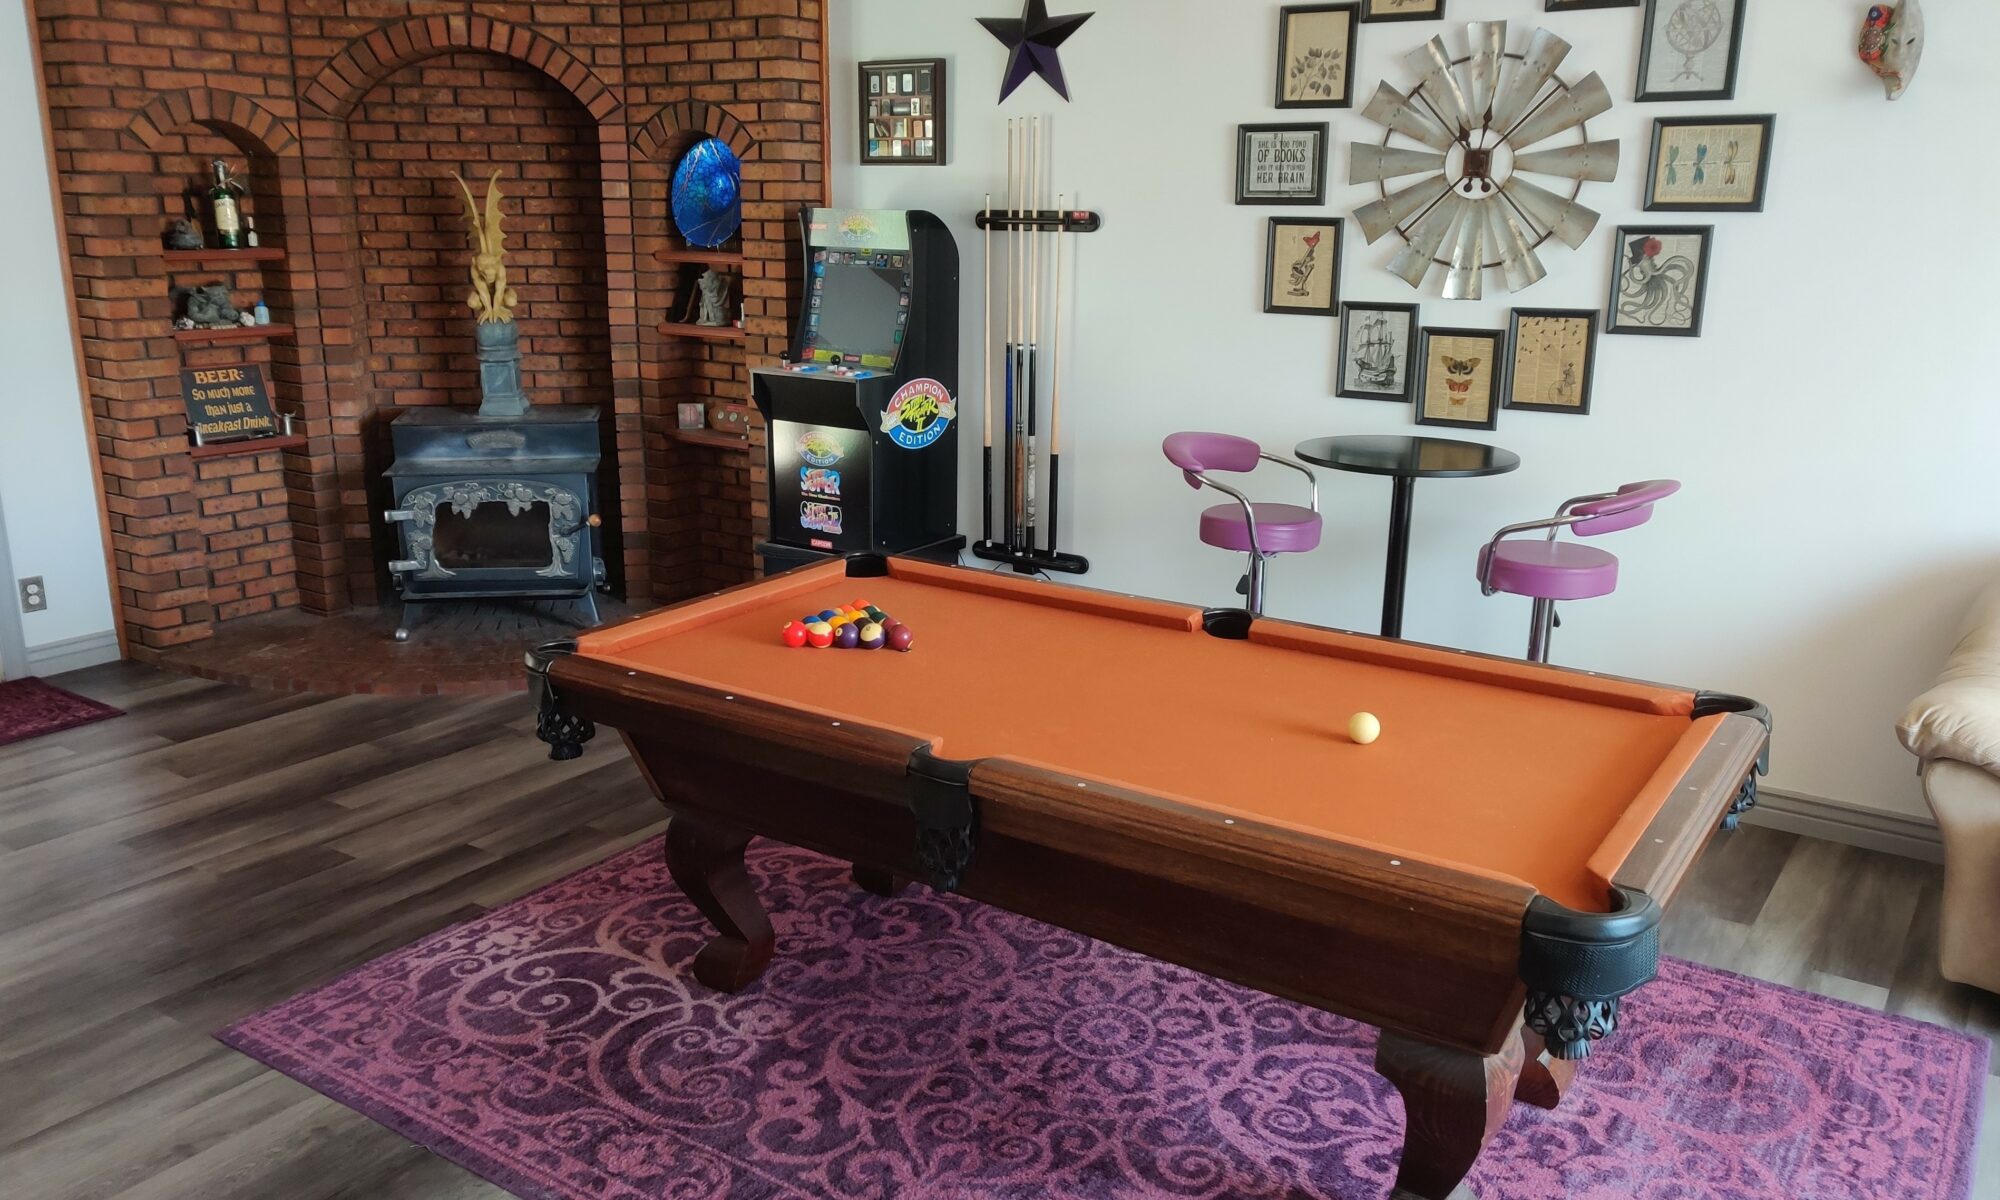 a stormy gray oak, waterproof, luxury vinyl plank (LVP) floor, installed by Hardwood Floorist in a customer's game room. The room has a large brick mantle with a wood burning stove, and contains a billiards table and a small, round, tall table and chairs set. There is interesting art on the walls, including a sign that says: "Beer: so much more than just a breakfast drink".